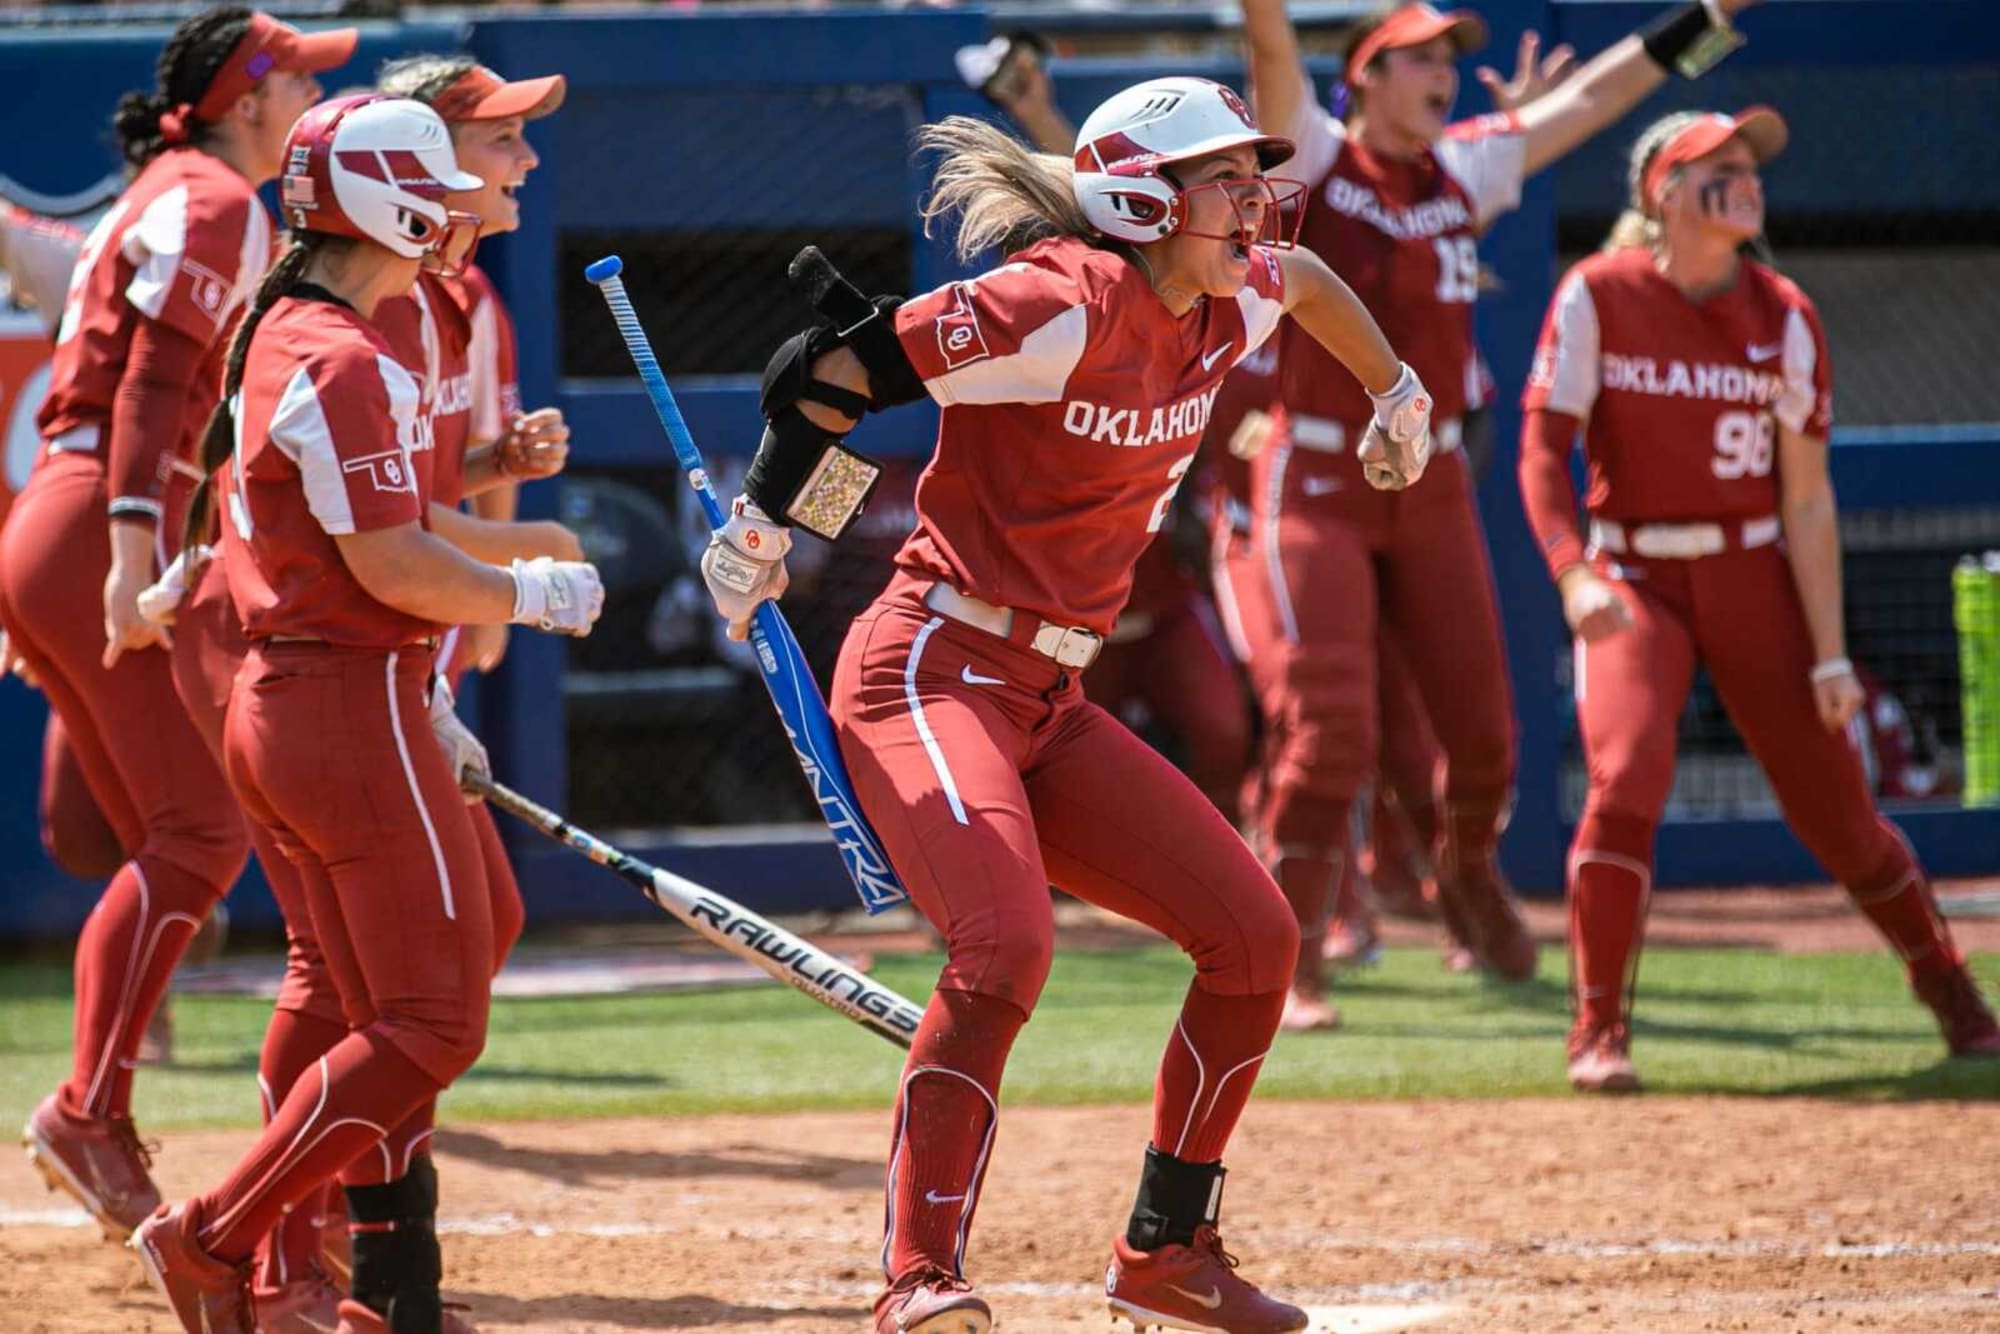 Oklahoma softball Sumble in Big 12 Tournament slight hiccup in